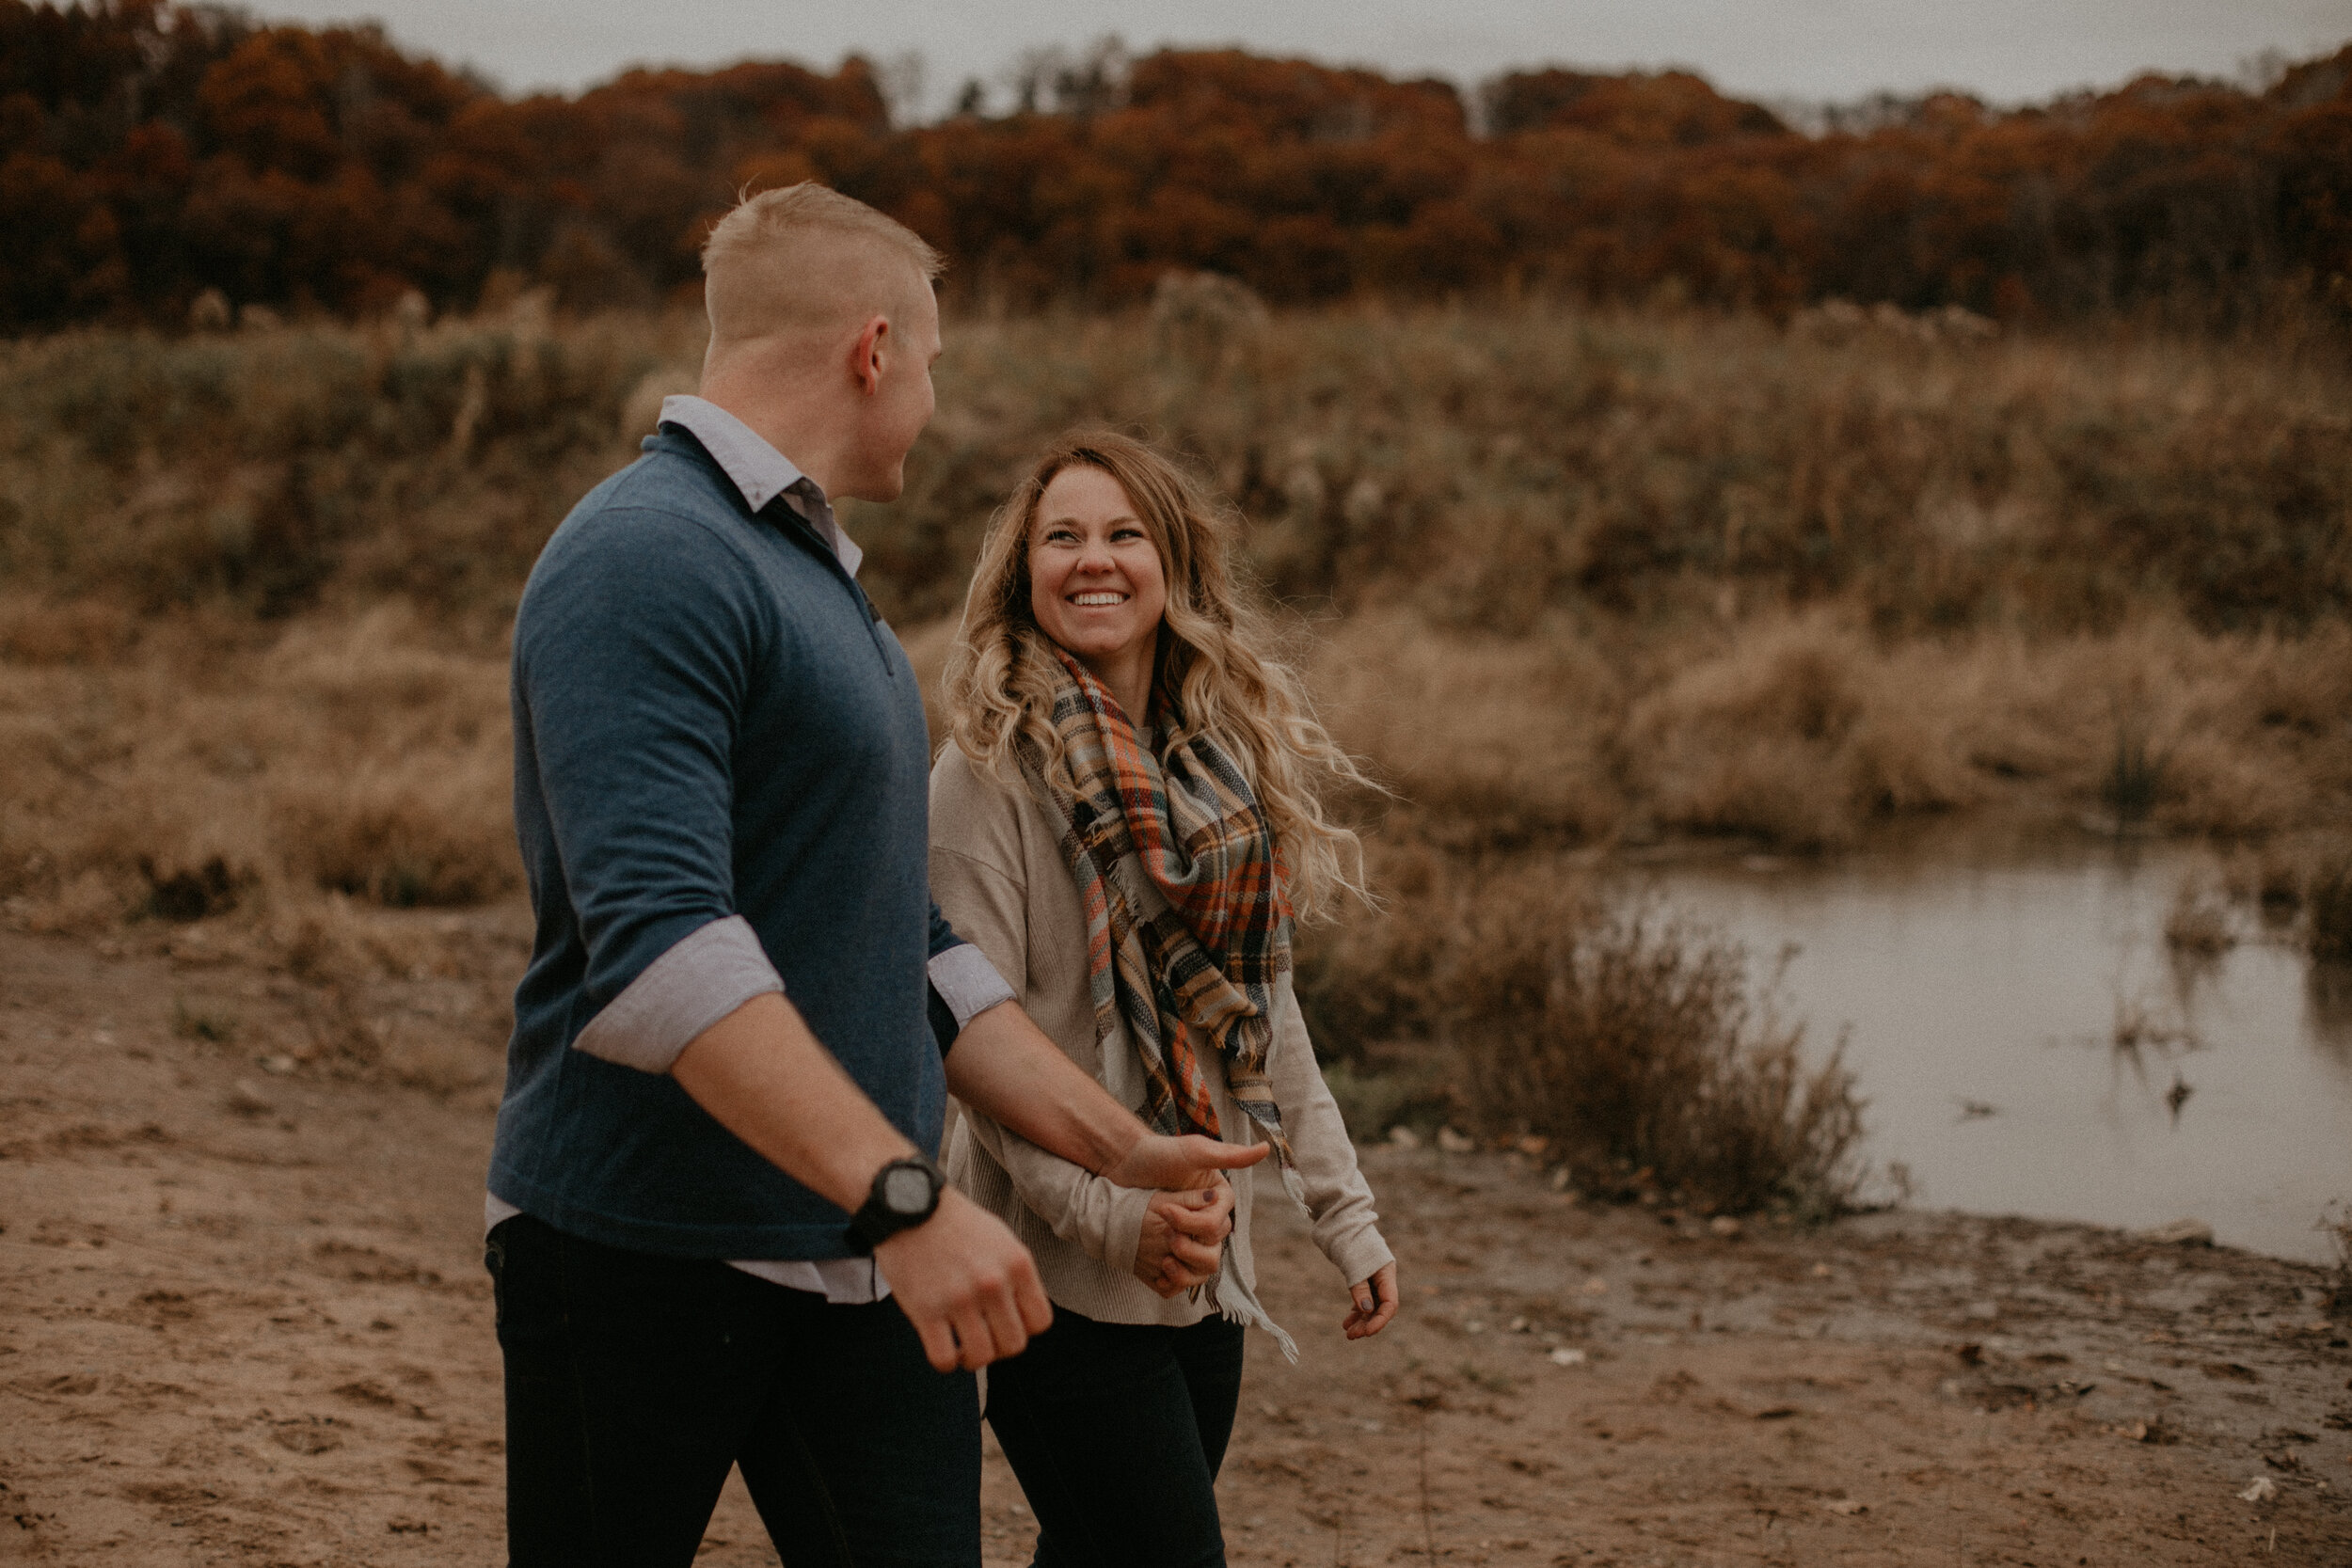  Willow River State Park Engagement Session. Hudson, Wisconsin. Fall Engagement Session. Couple Photos. Adventurous Couple. Adventurous Engagement Session. Wedding Photographer. Engagement Photographer.  